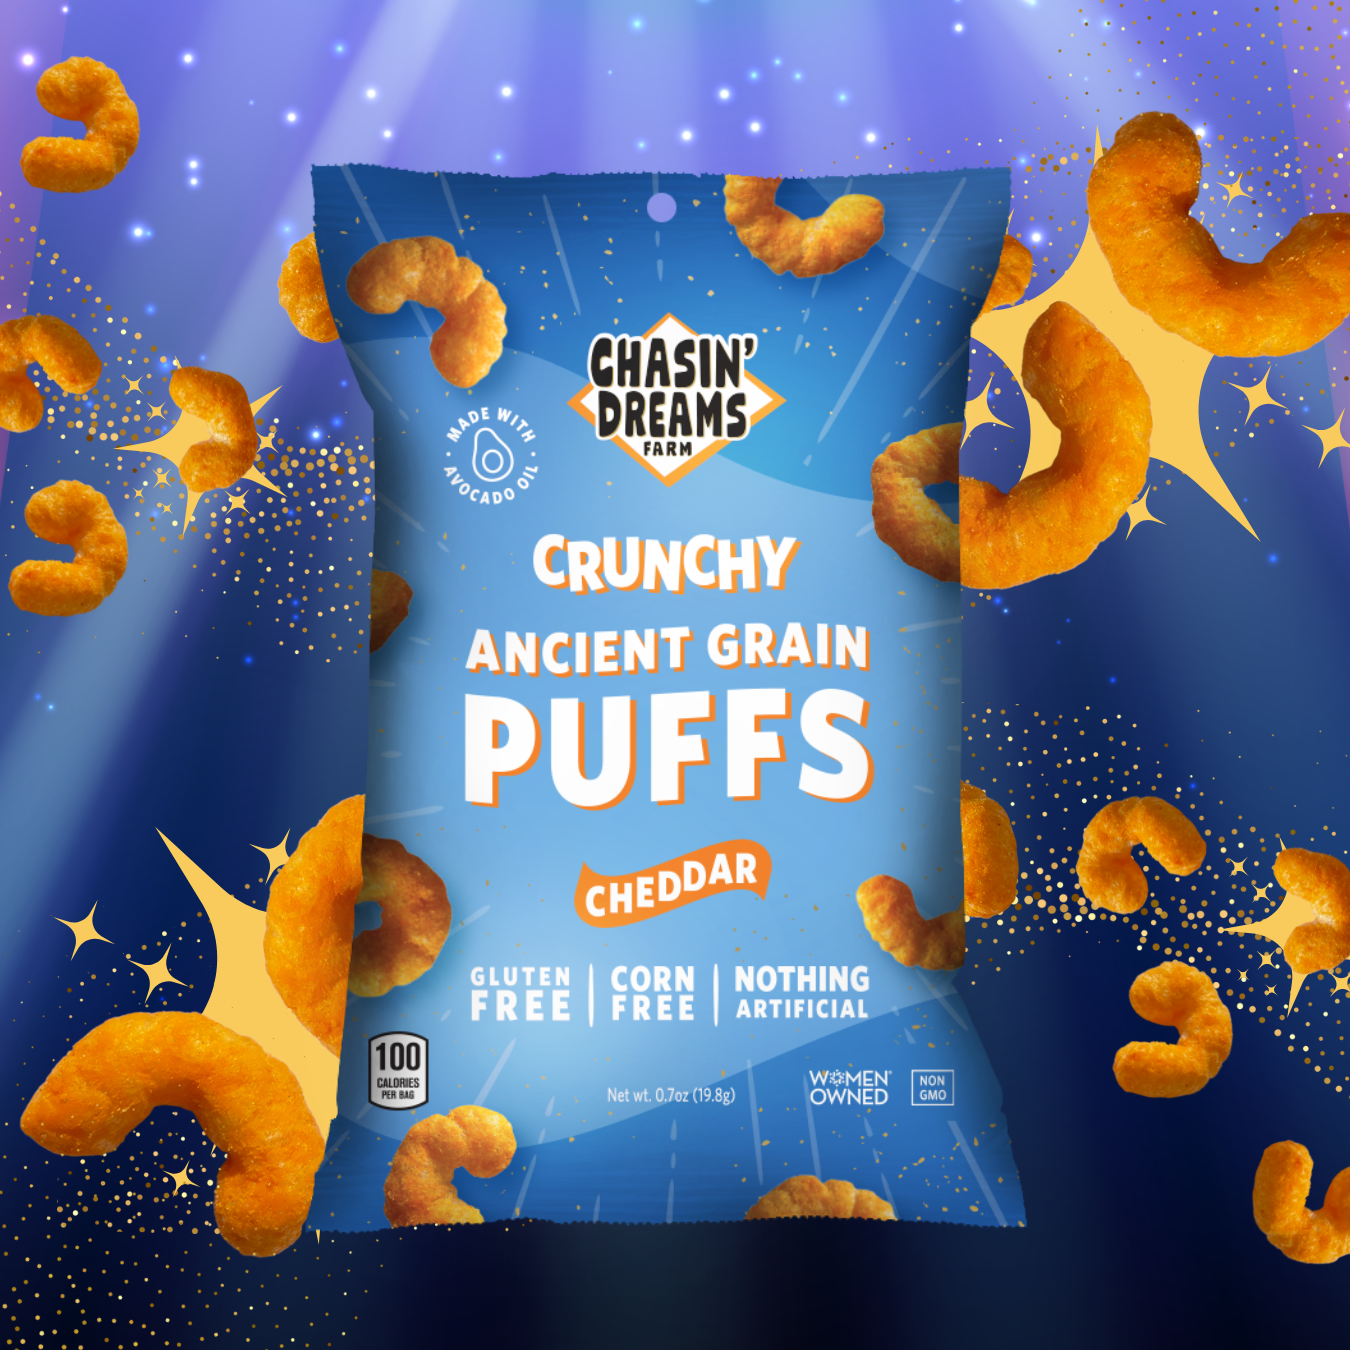 Blue bag of Crunchy Ancient Grain Puffs : Cheddar. Orange puffs on the bag on a blue background with a spotlight.